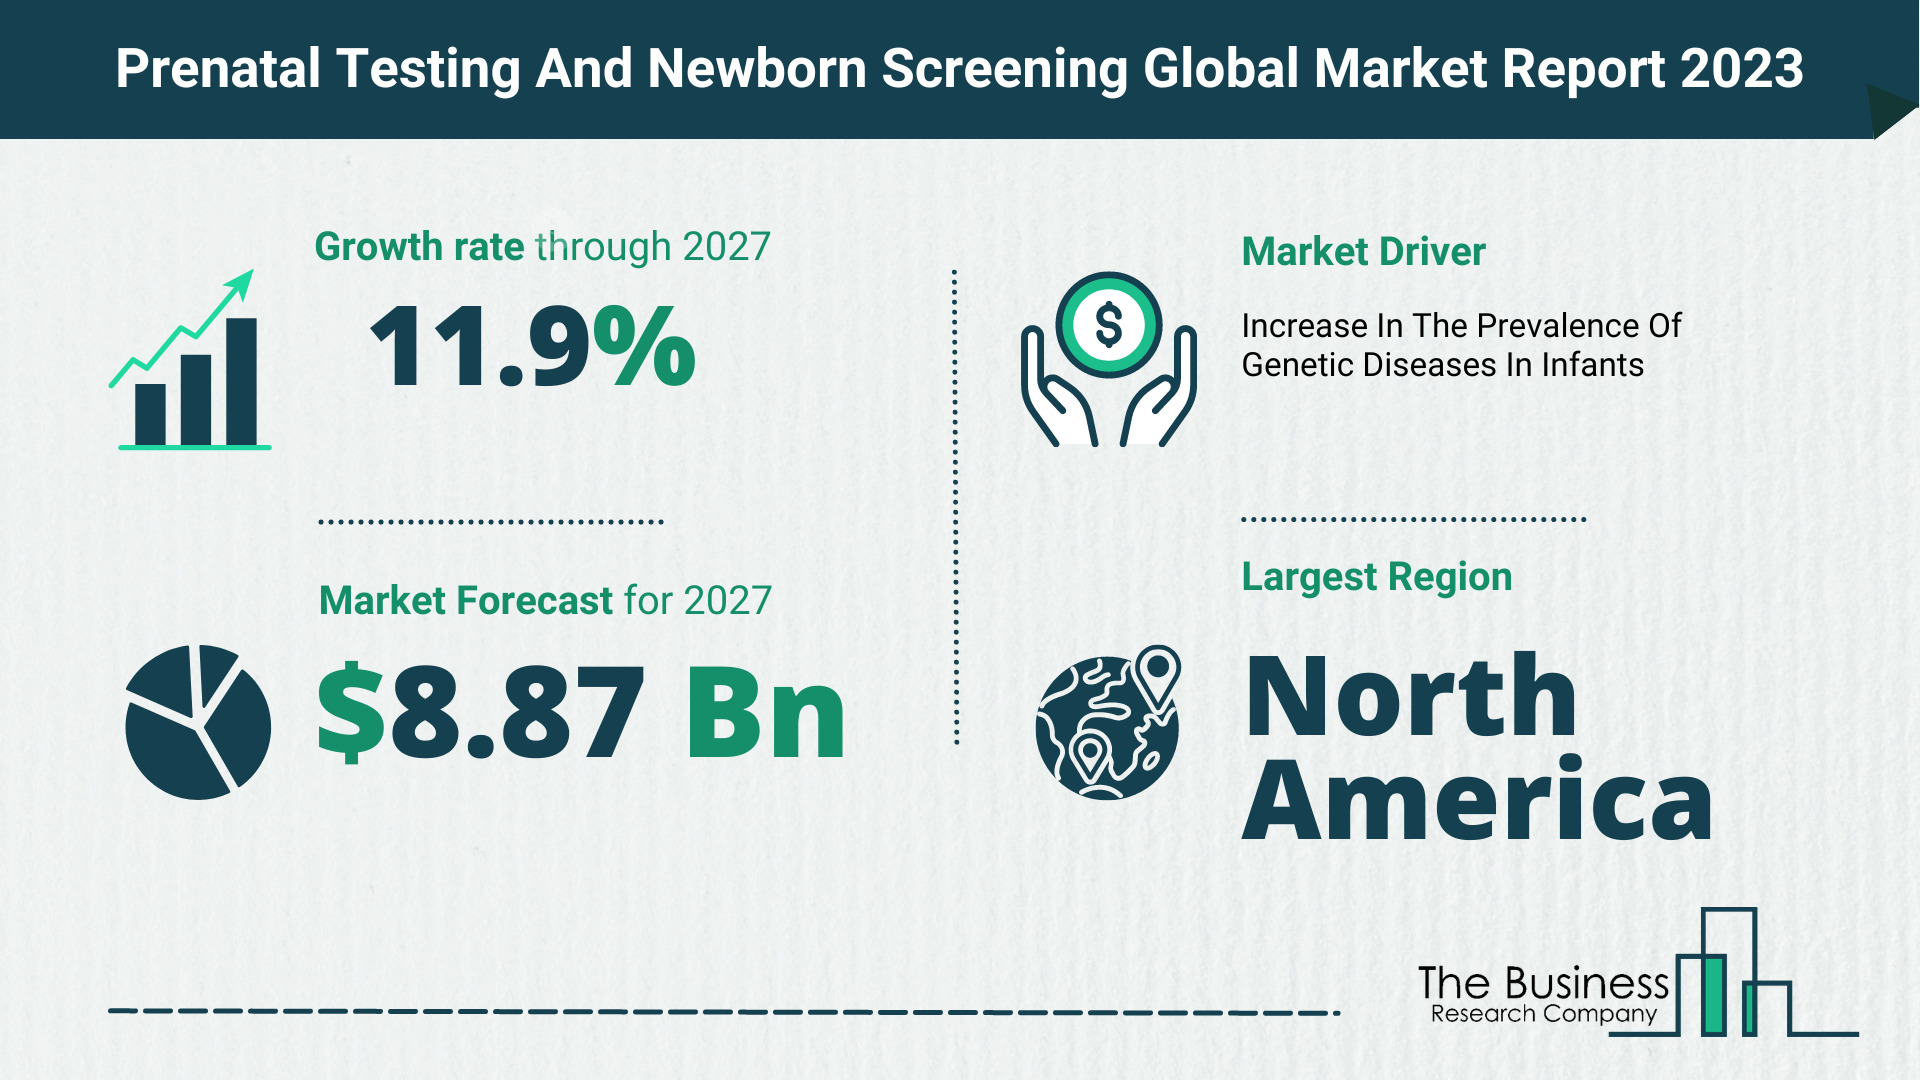 Prenatal Testing And Newborn Screening Market Forecast 2023-2027 By The Business Research Company